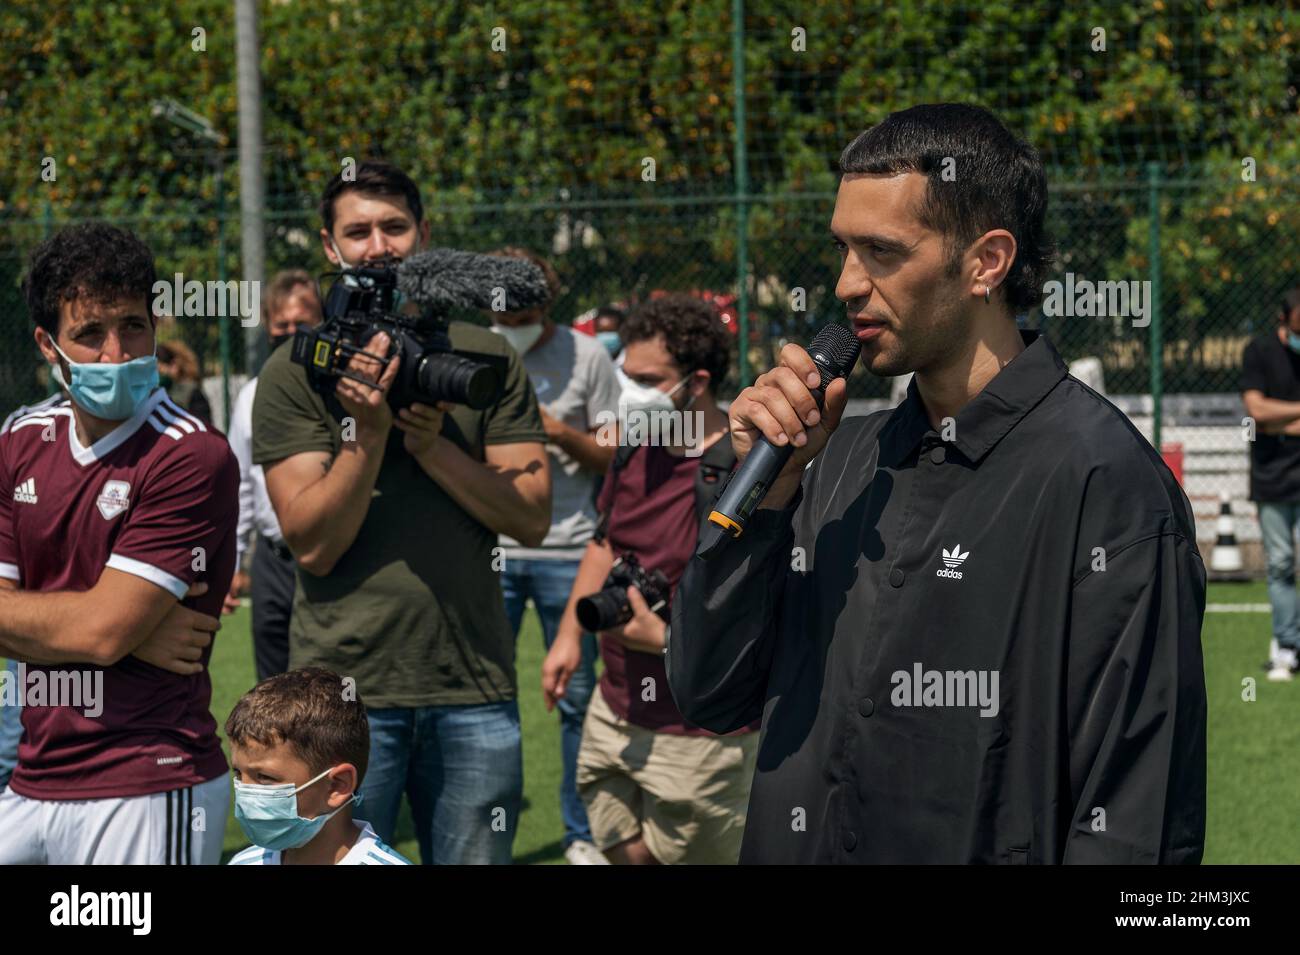 The Italian singer songwriter Mahmood, winner of Sanremo Song Festivals, with the boys of Calcio Sociale in Corviale, on the outskirts of Rome, Italy. Stock Photo